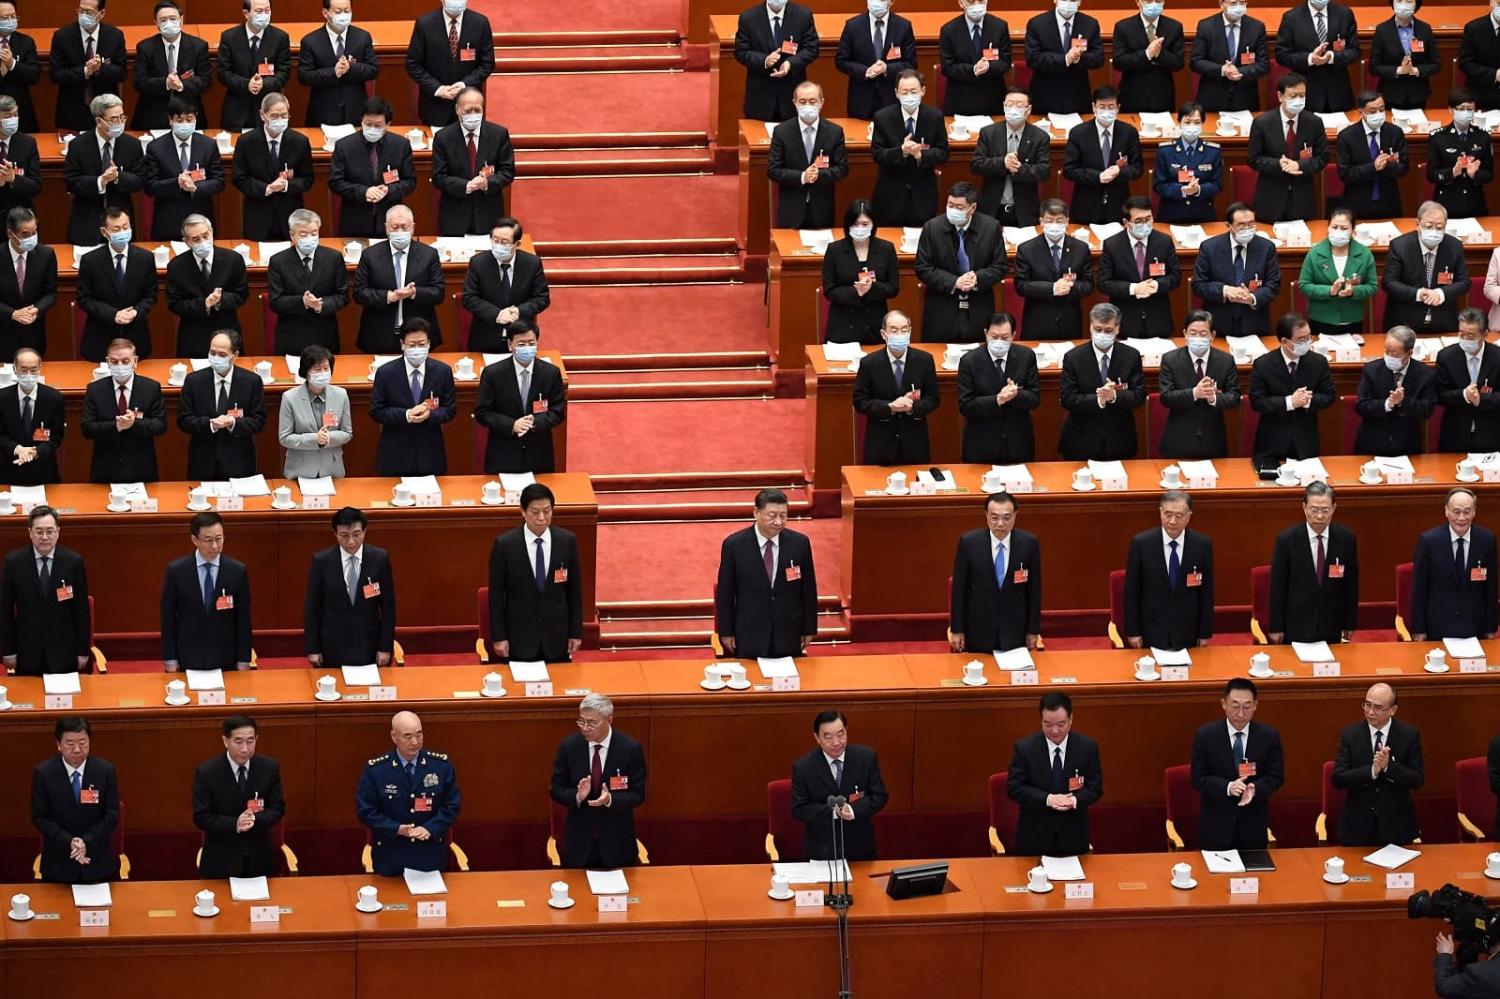 China’s President Xi Jinping (C) attends the National People’s Congress with Chinese leaders and delegates at the Great Hall of the People in Beijing, 8 March 2022 (Leo Ramirez/AFP via Getty Images)